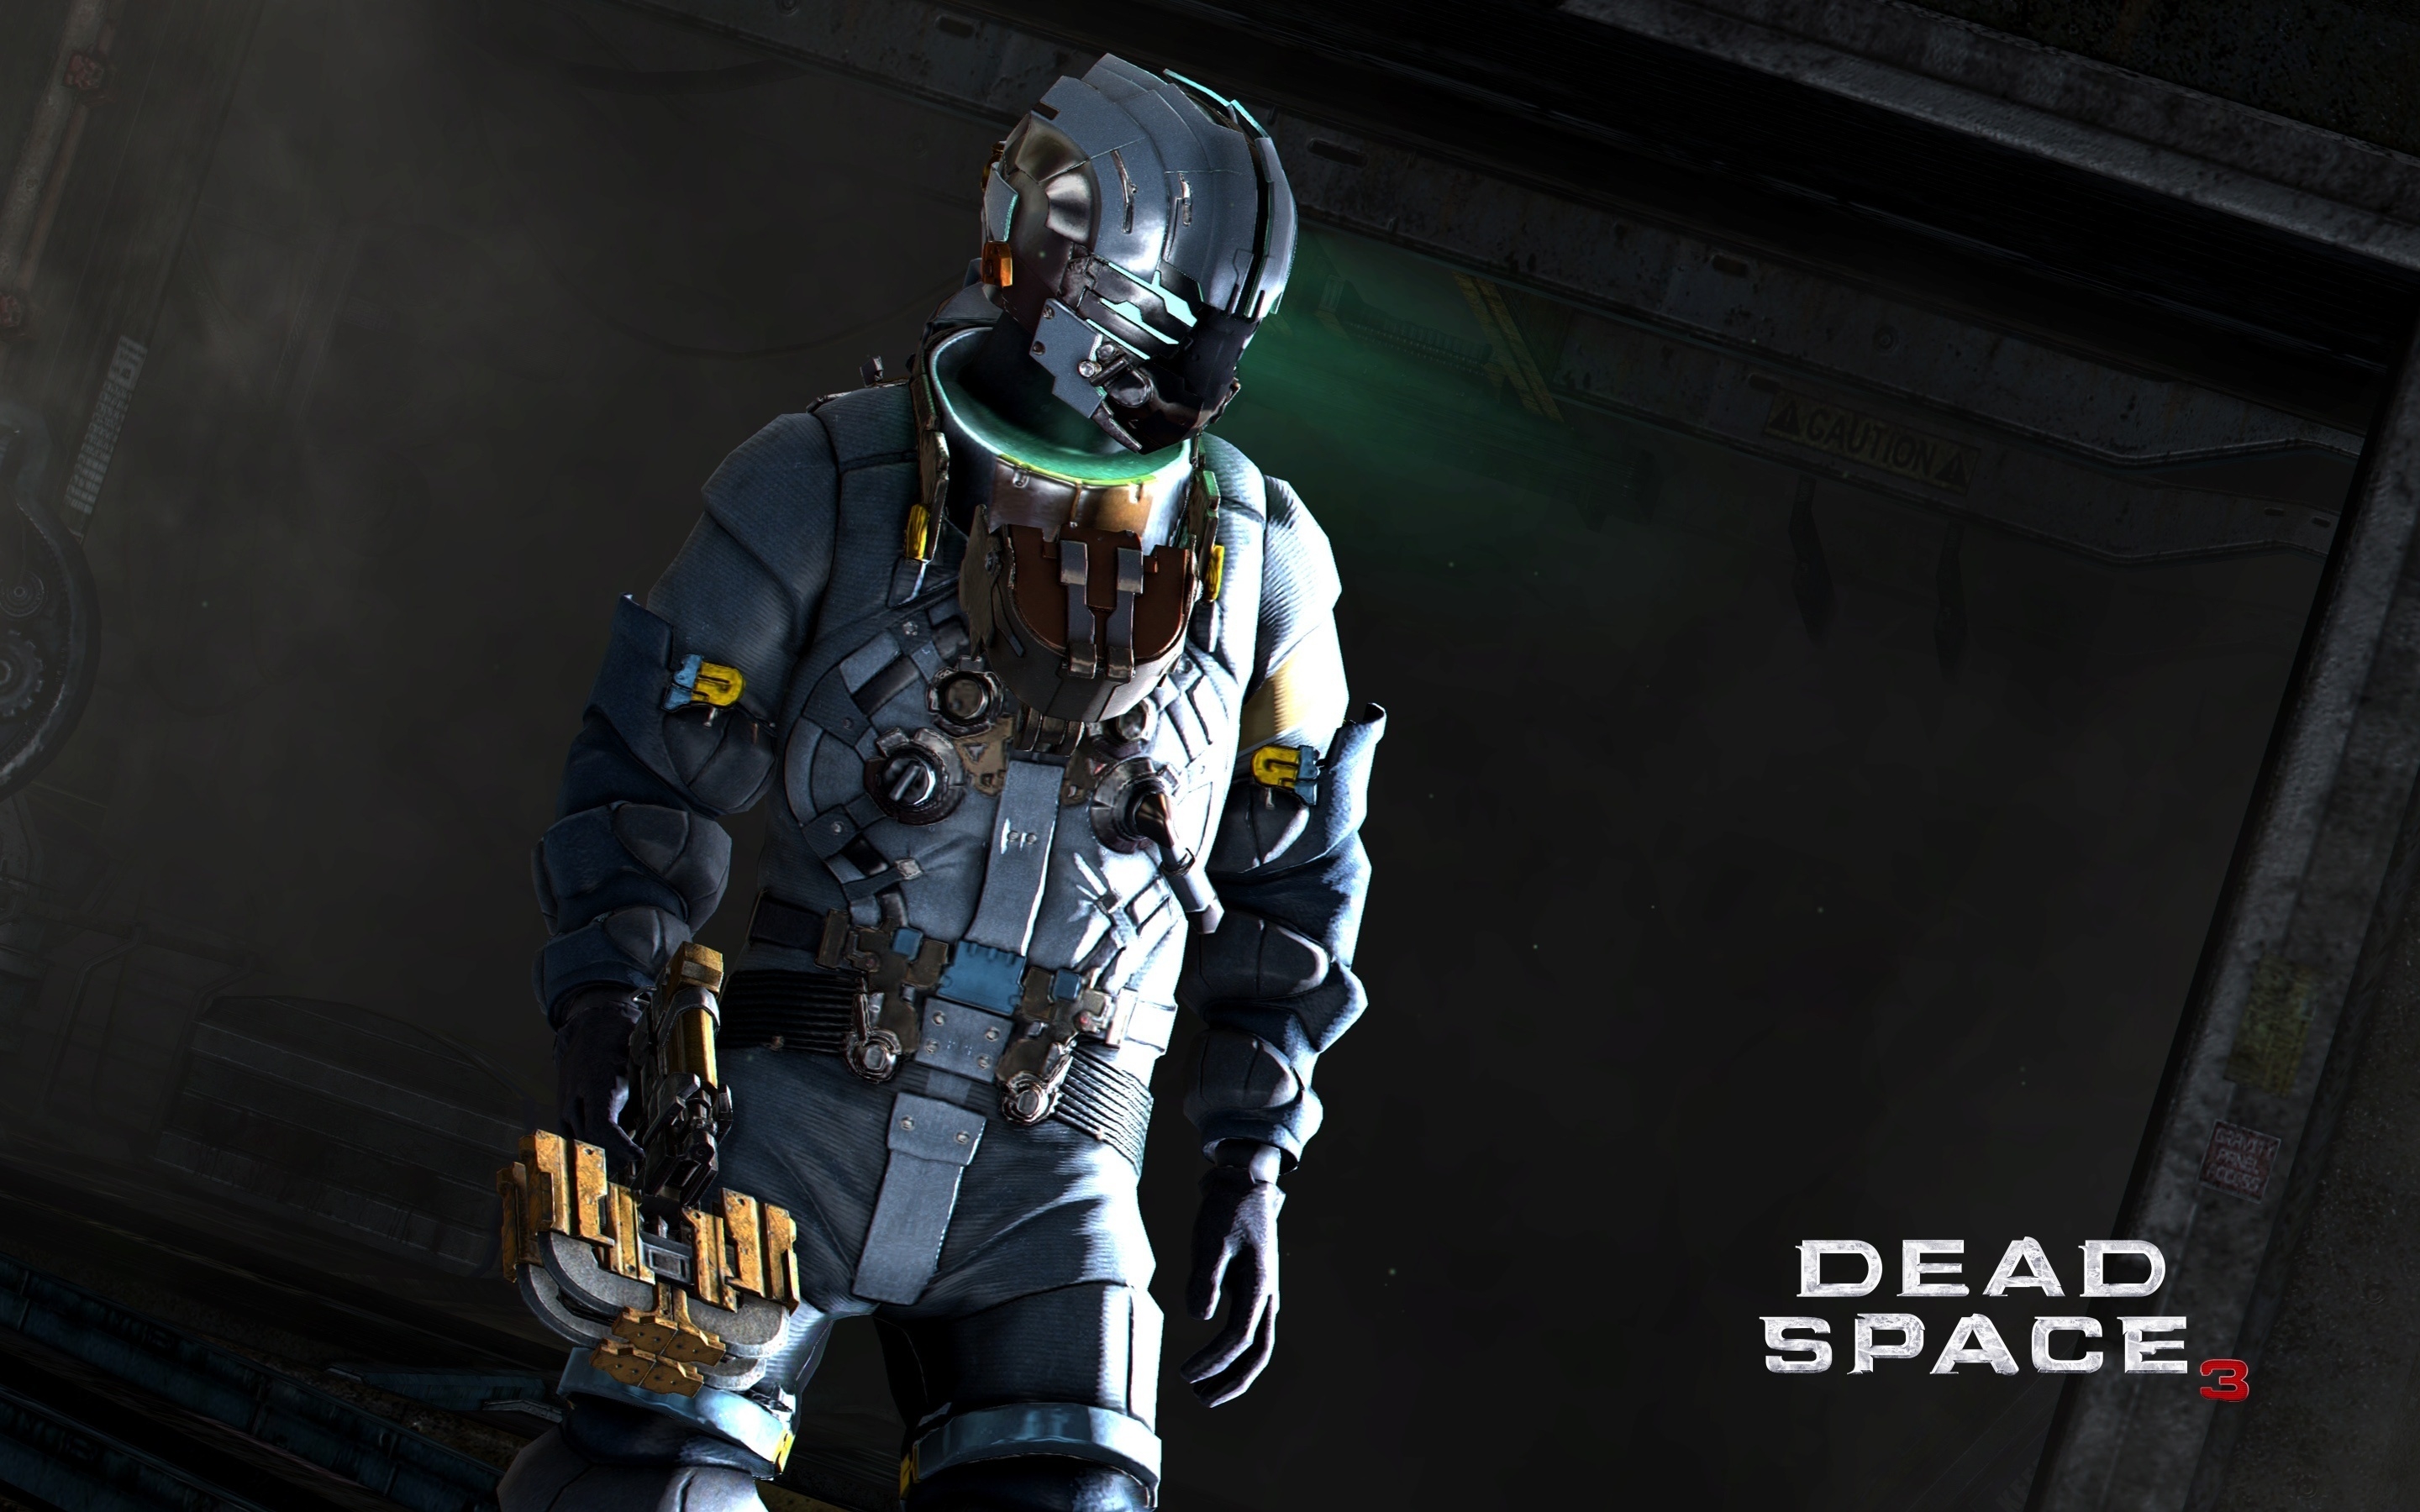 Dead Space 3 Costume for 2880 x 1800 Retina Display resolution